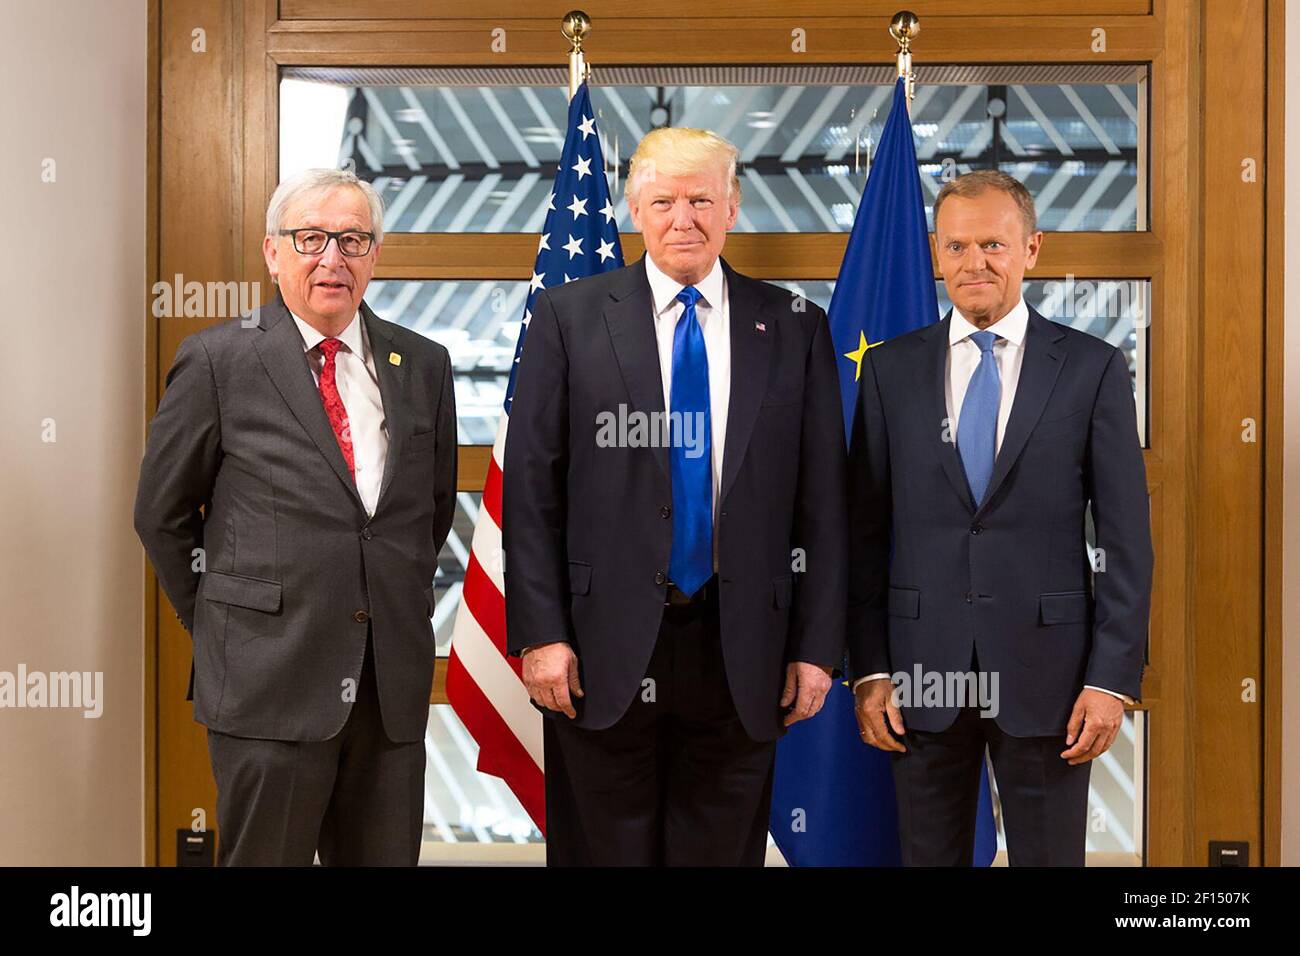 President Donald Trump poses for a photo with European Union leaders President Jean-Claude Juncker and European Council President Donald Tusk Thursday May 25 2017 at the European Union Headquarters in Brussels prior to the start of their bilateral meeting. Stock Photo